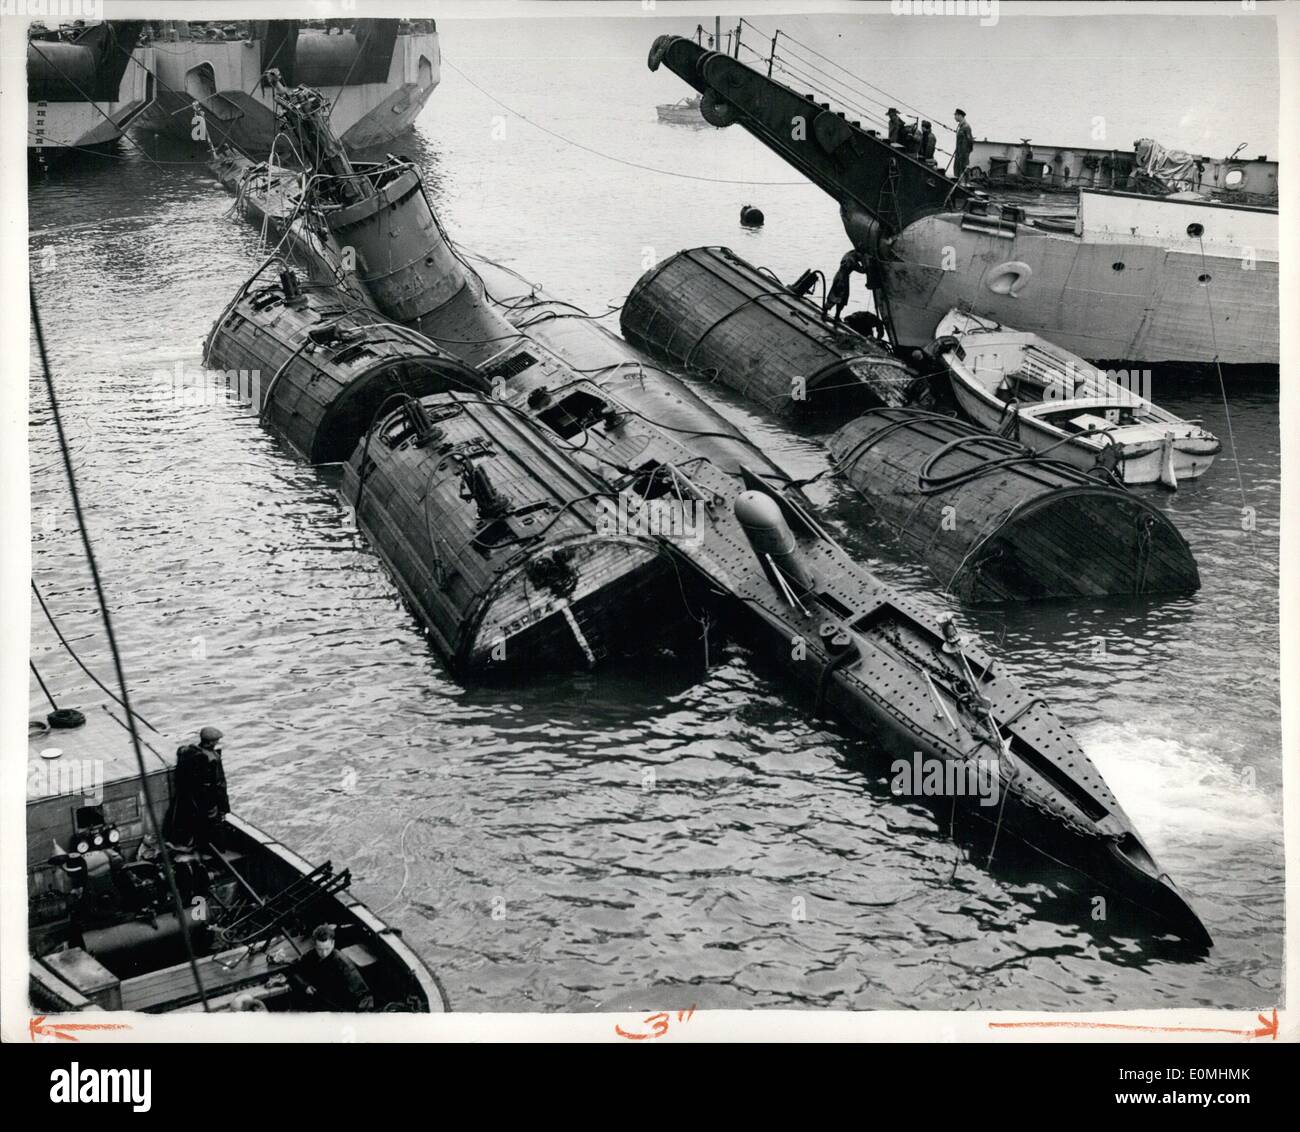 Jun. 06, 1955 - The Sunken Submarine Surfaces in Portland Harbour.: Submarine Sidon surfaces - a week after she had plunged to the bottom of Portland Harbour following an explosion. After surfacing she was moored alongside the mother ship Maidstone. No attempt will be made to get inside her until she is beached today. Photo shows The mud-covered hulk of the submarine Sidon is afloat once more secured to the giant bouyancy tanks which were used in the 21-hour battle to raise her. Stock Photo